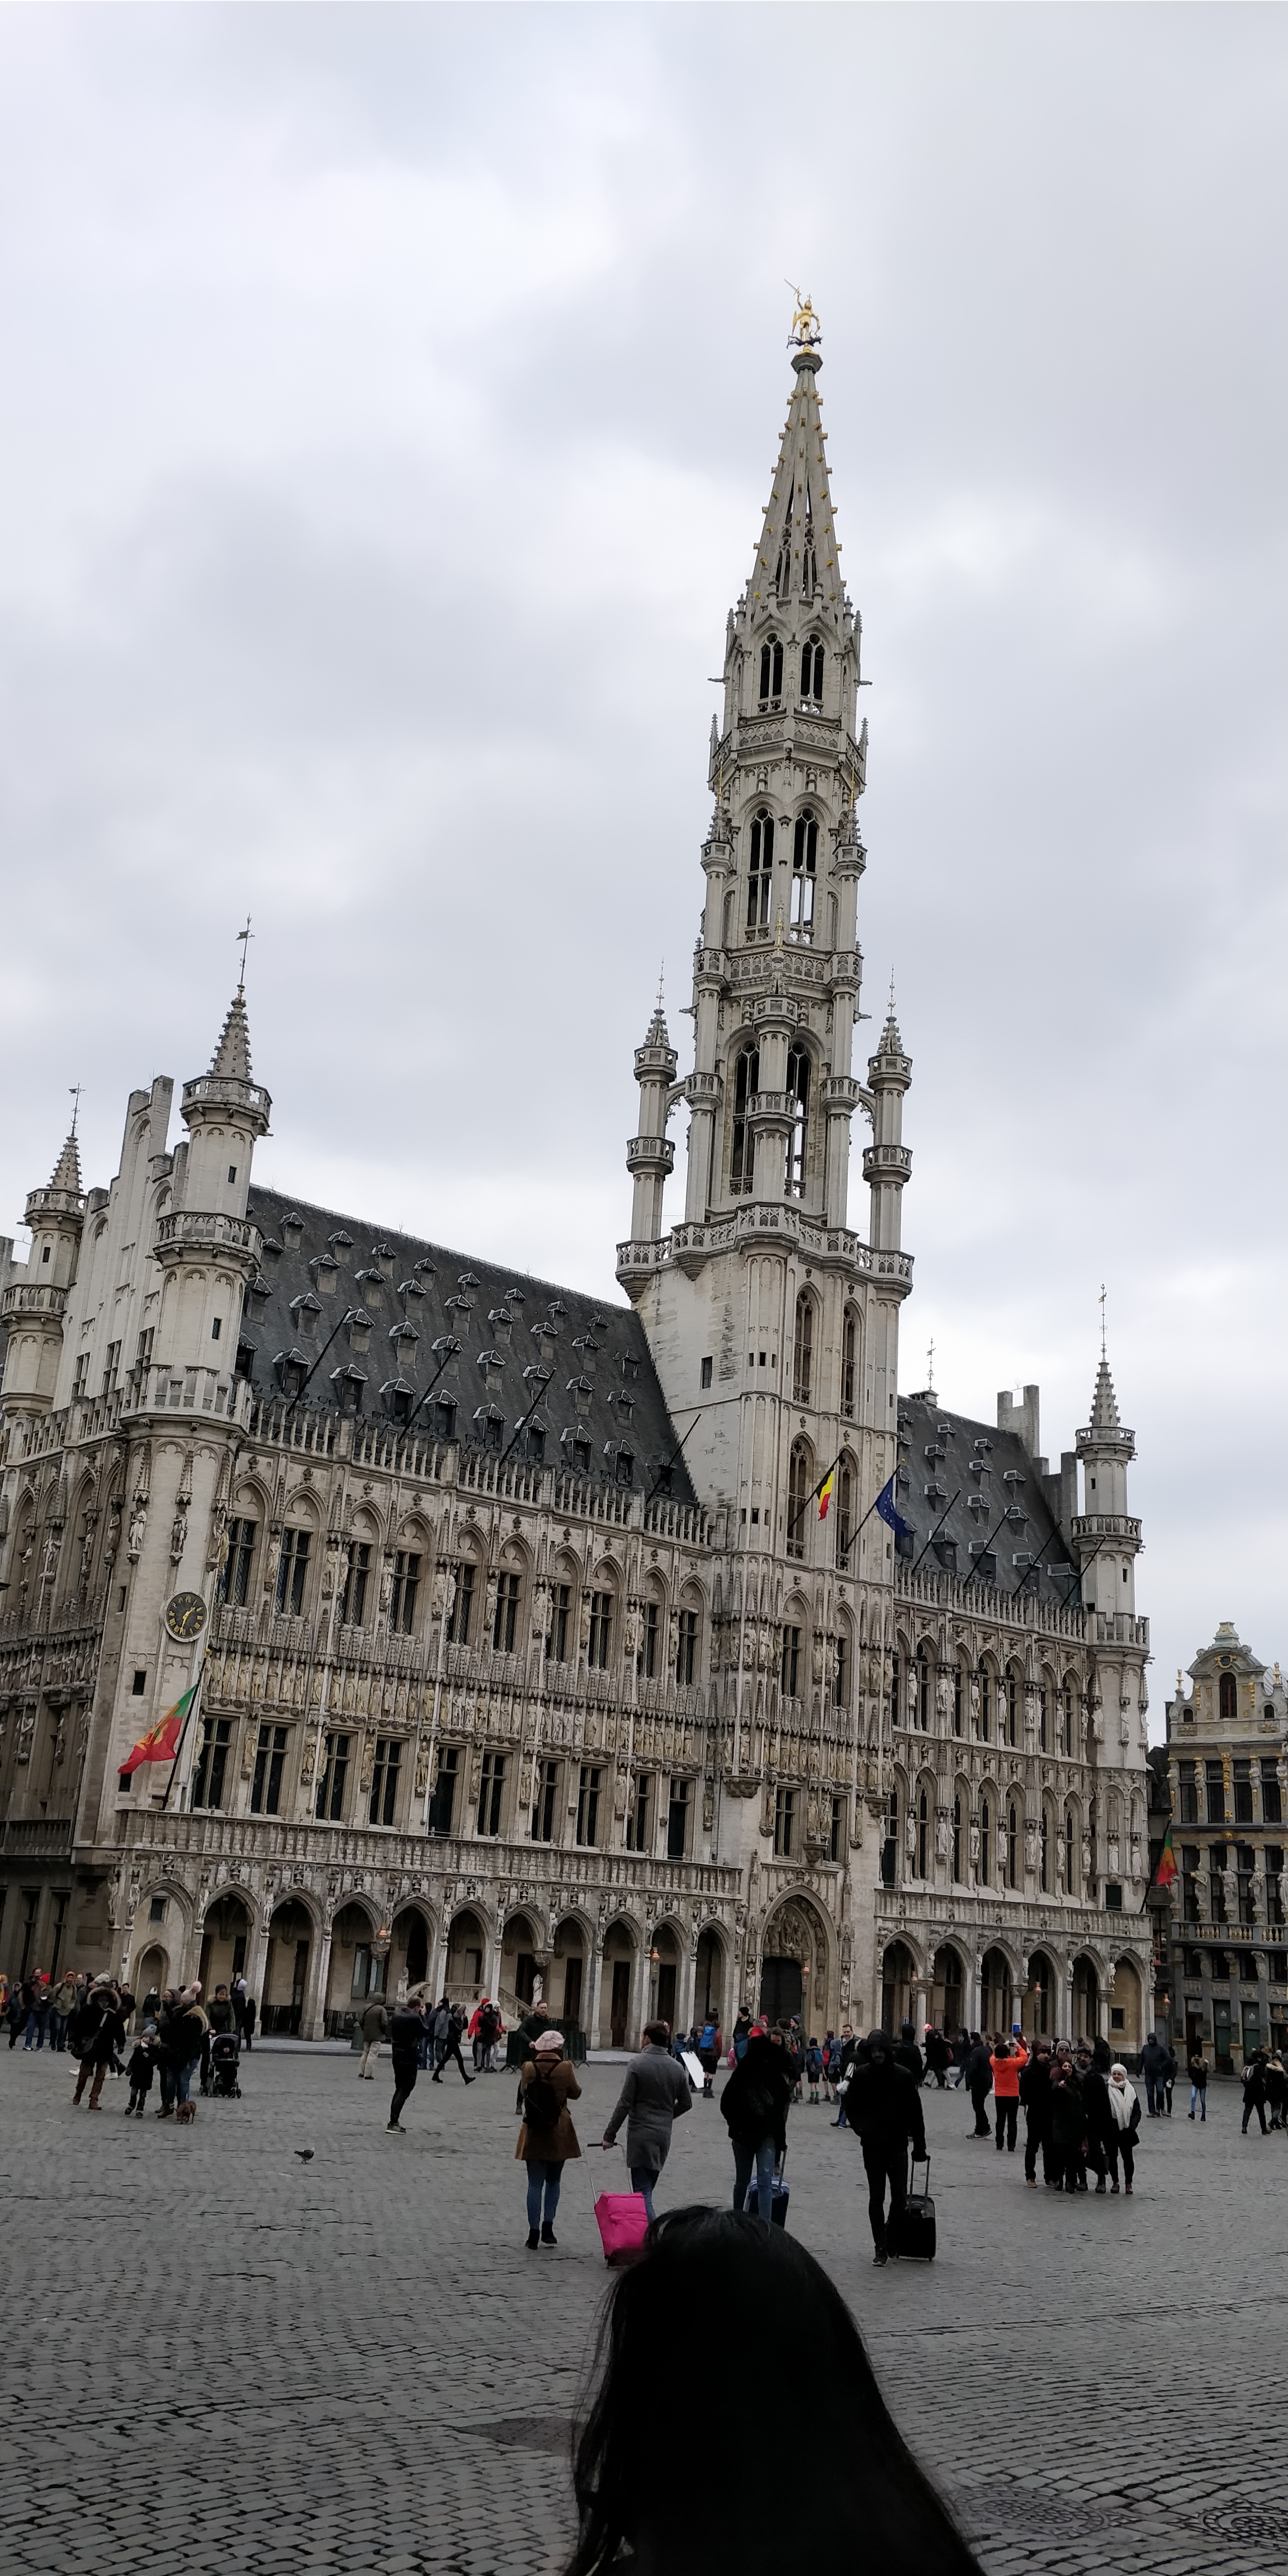 The Town Hall image from Brussels